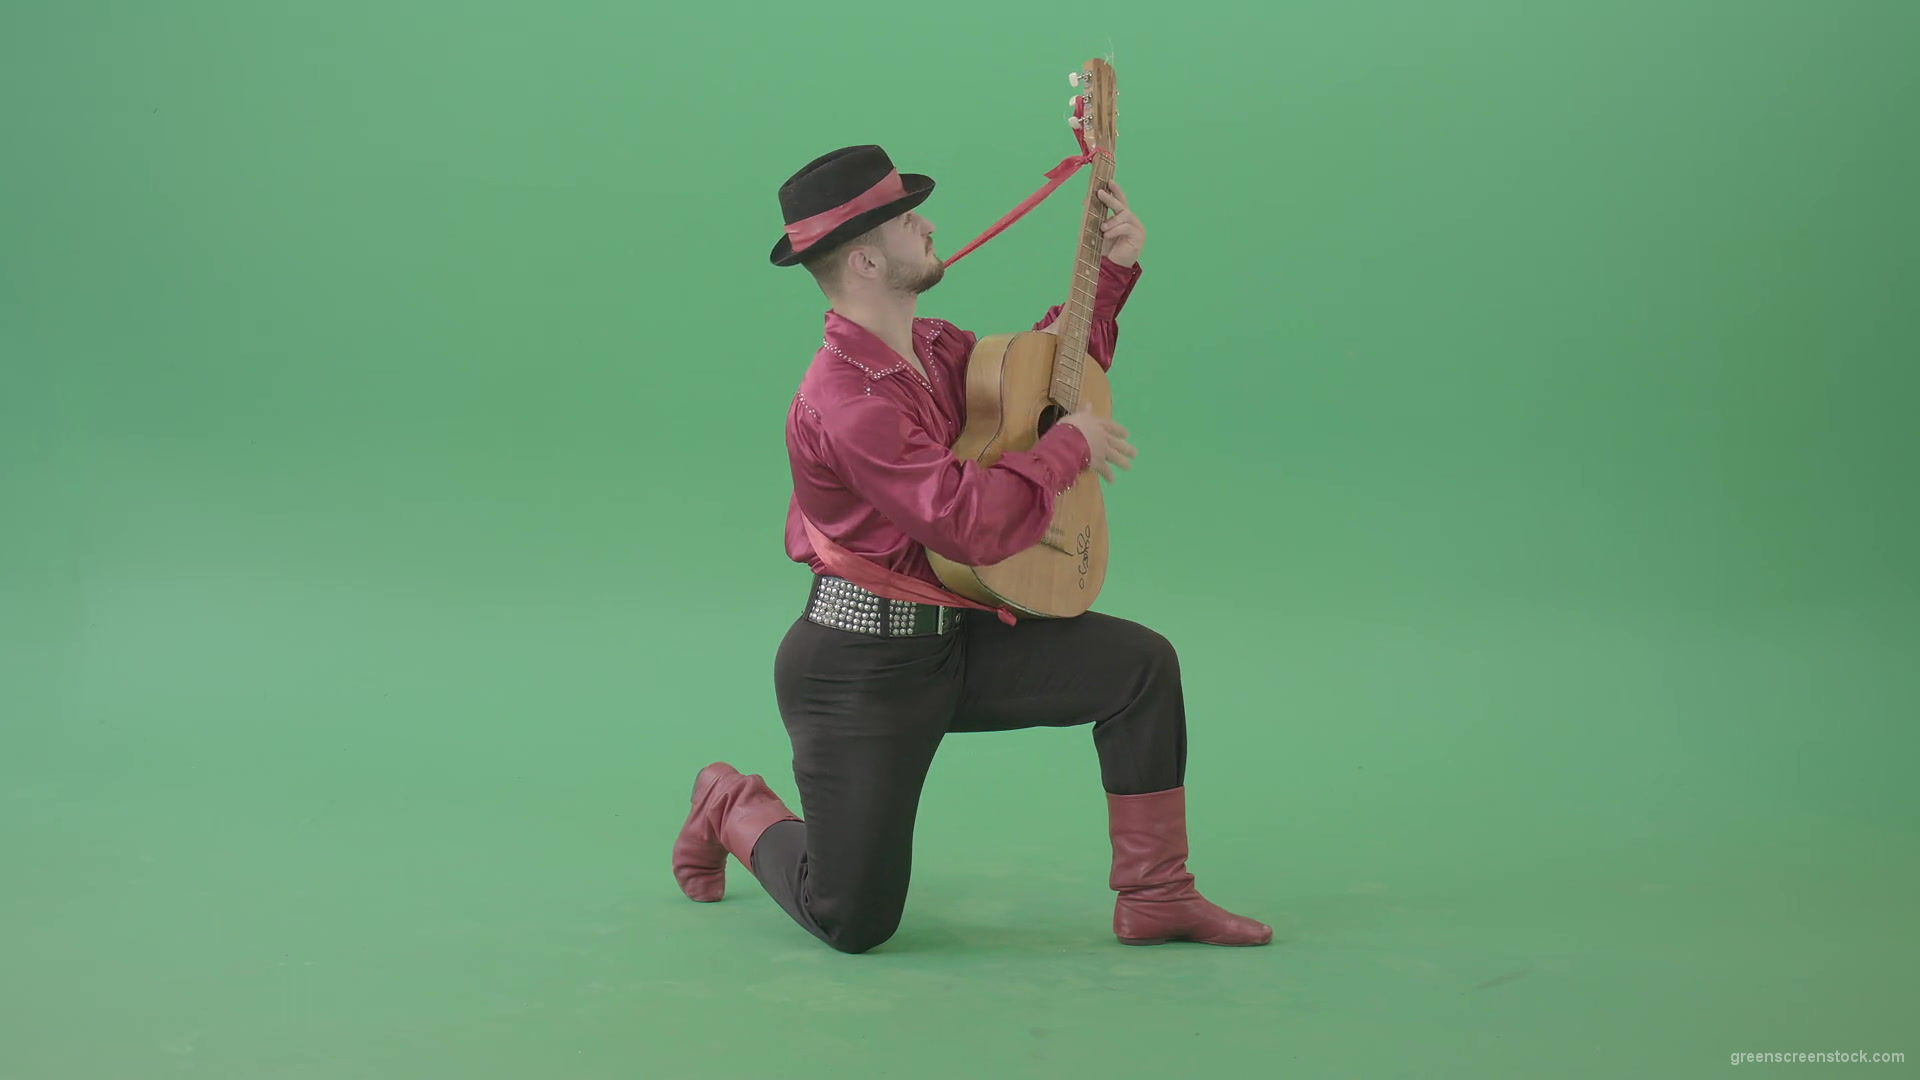 Man-in-Gipsy-costume-playing-love-song-on-guitar-isolated-on-green-screen-4K-Video-Footage-1920_004 Green Screen Stock